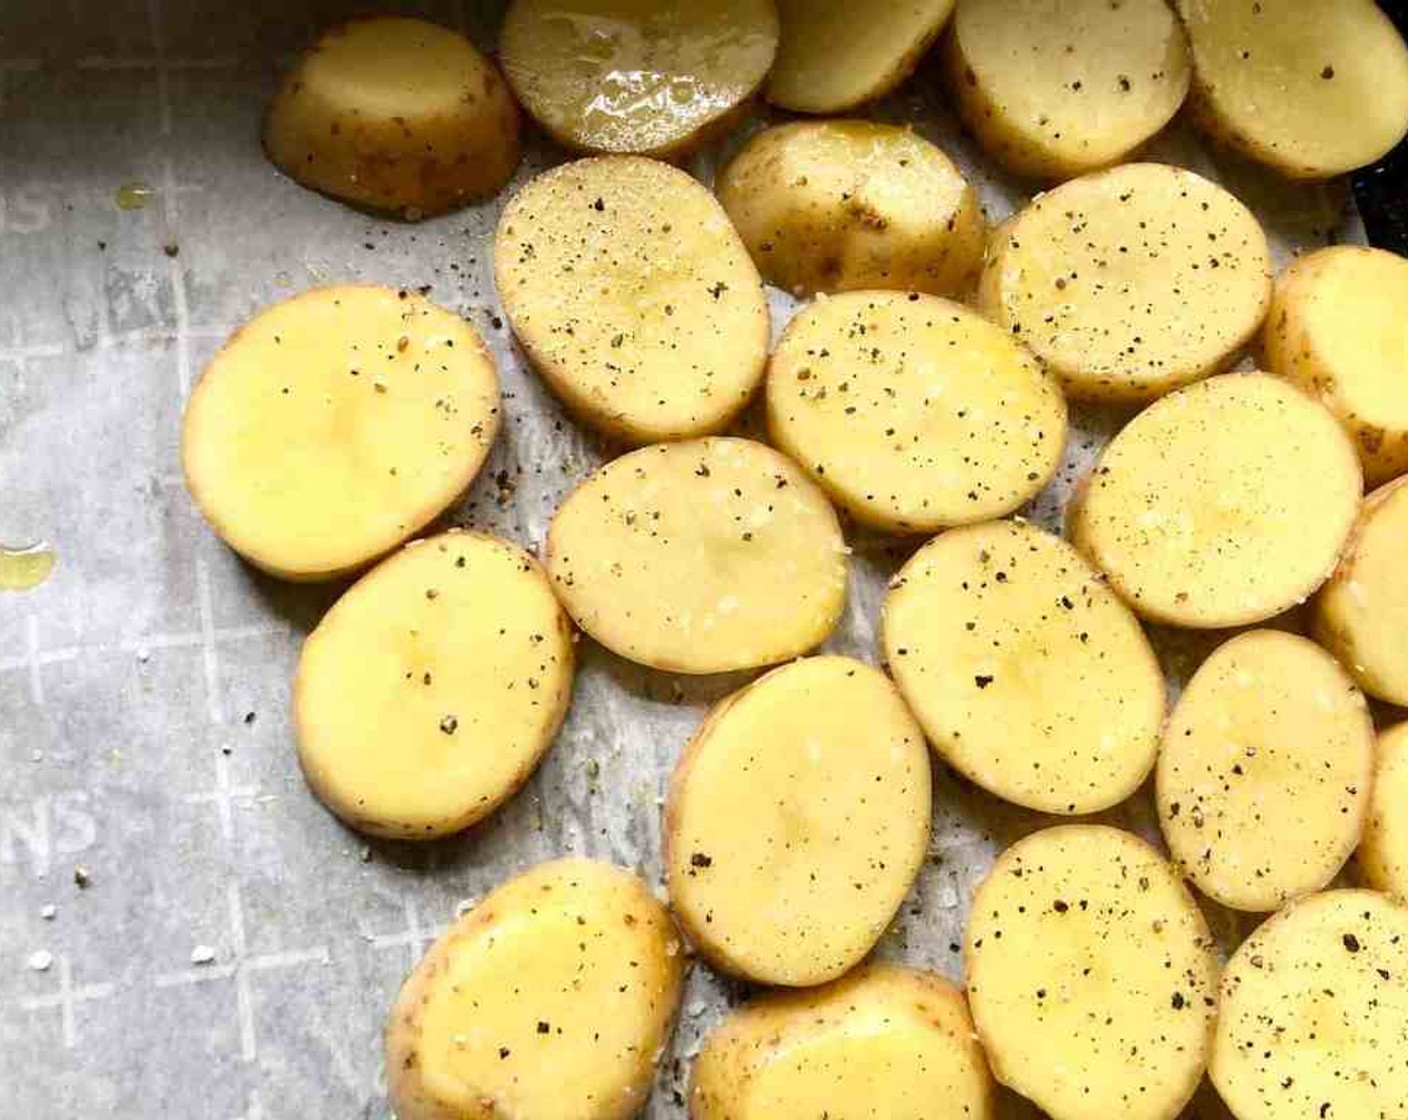 step 4 Grease a 15x10x1-inch baking pan or line with parchment paper. Brush the Yukon Gold Potatoes (3 cups) lightly with Olive Oil (1 Tbsp). Season with Salt (to taste) and Freshly Ground Black Pepper (to taste).